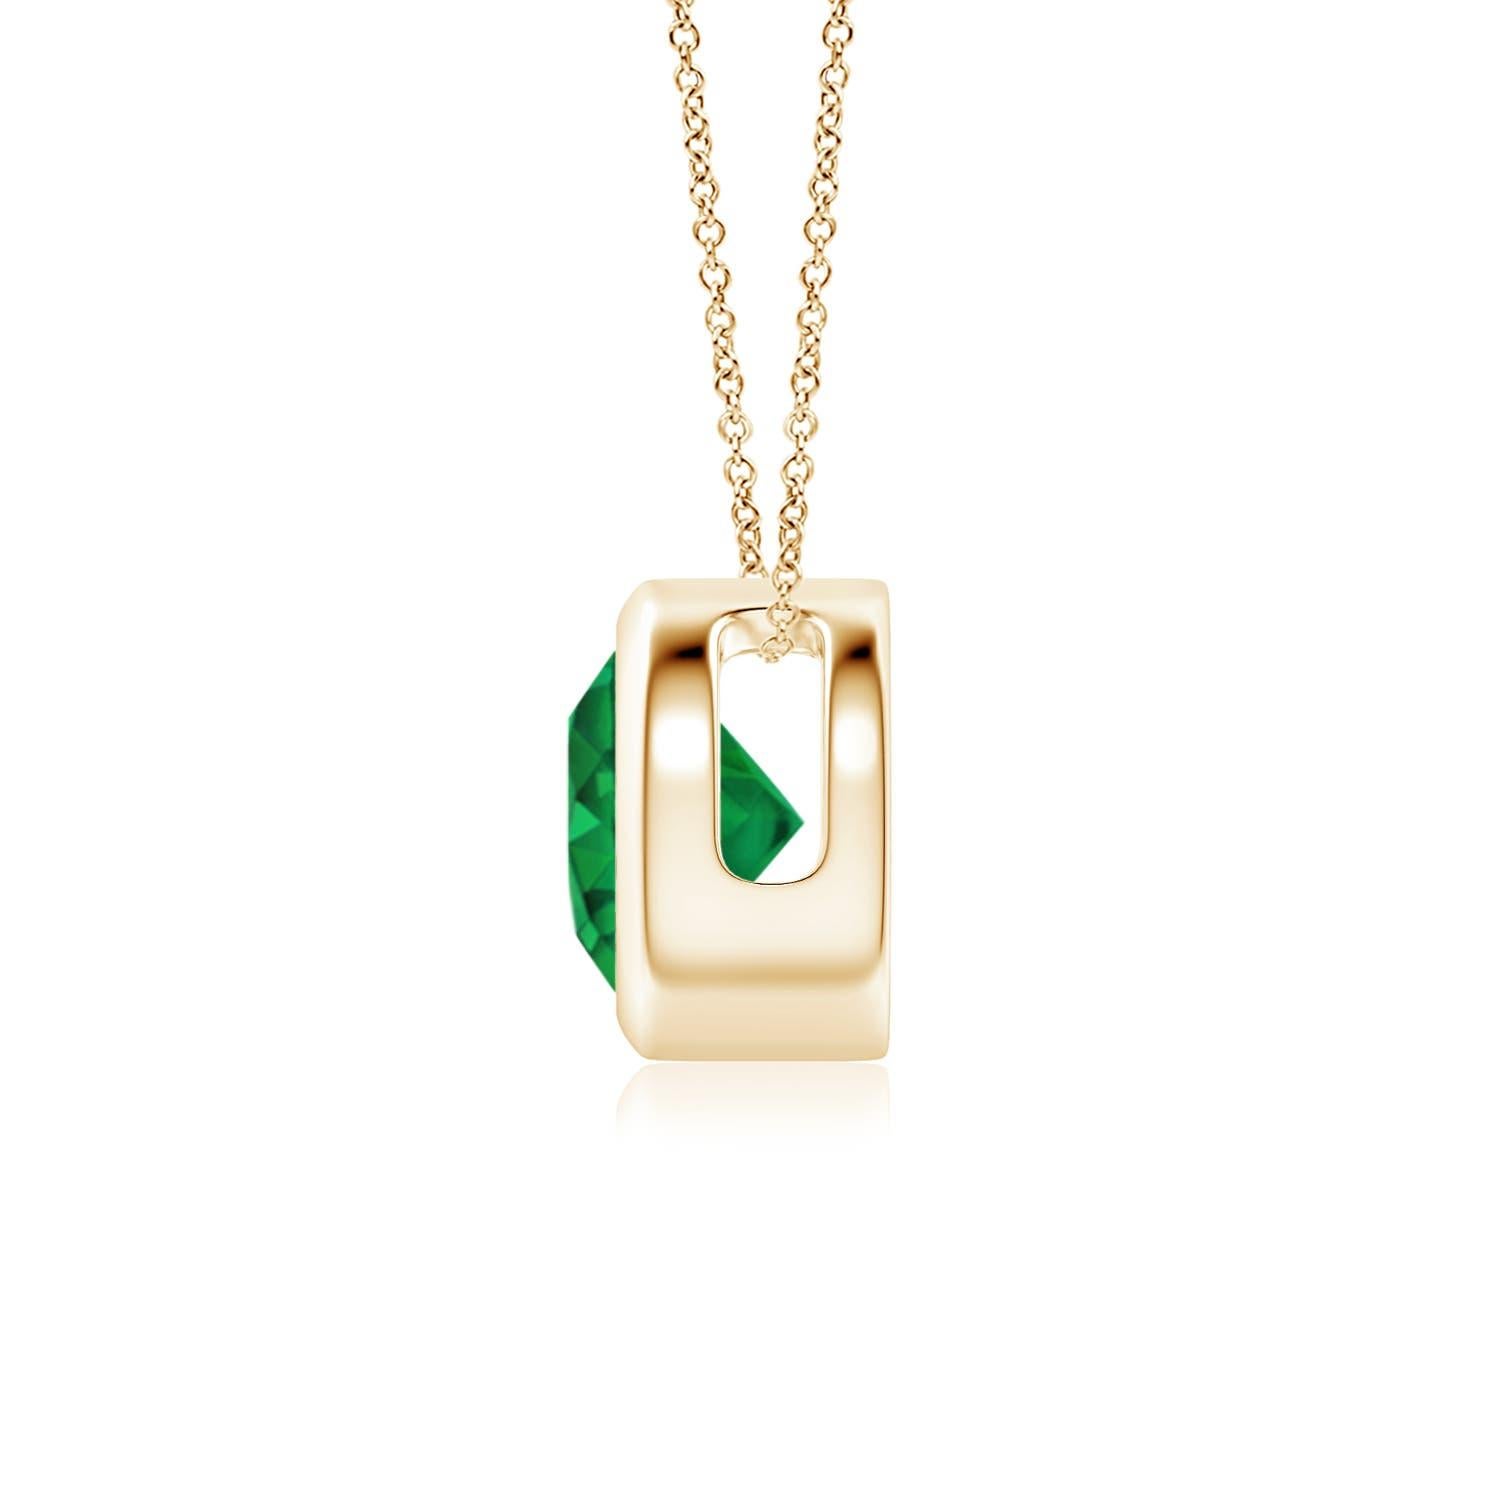 This classic solitaire emerald pendant's beautiful design makes the center stone appear like it's floating on the chain. The lush green emerald is secured in a bezel setting. Crafted in 14k yellow gold, this round emerald pendant is simple yet